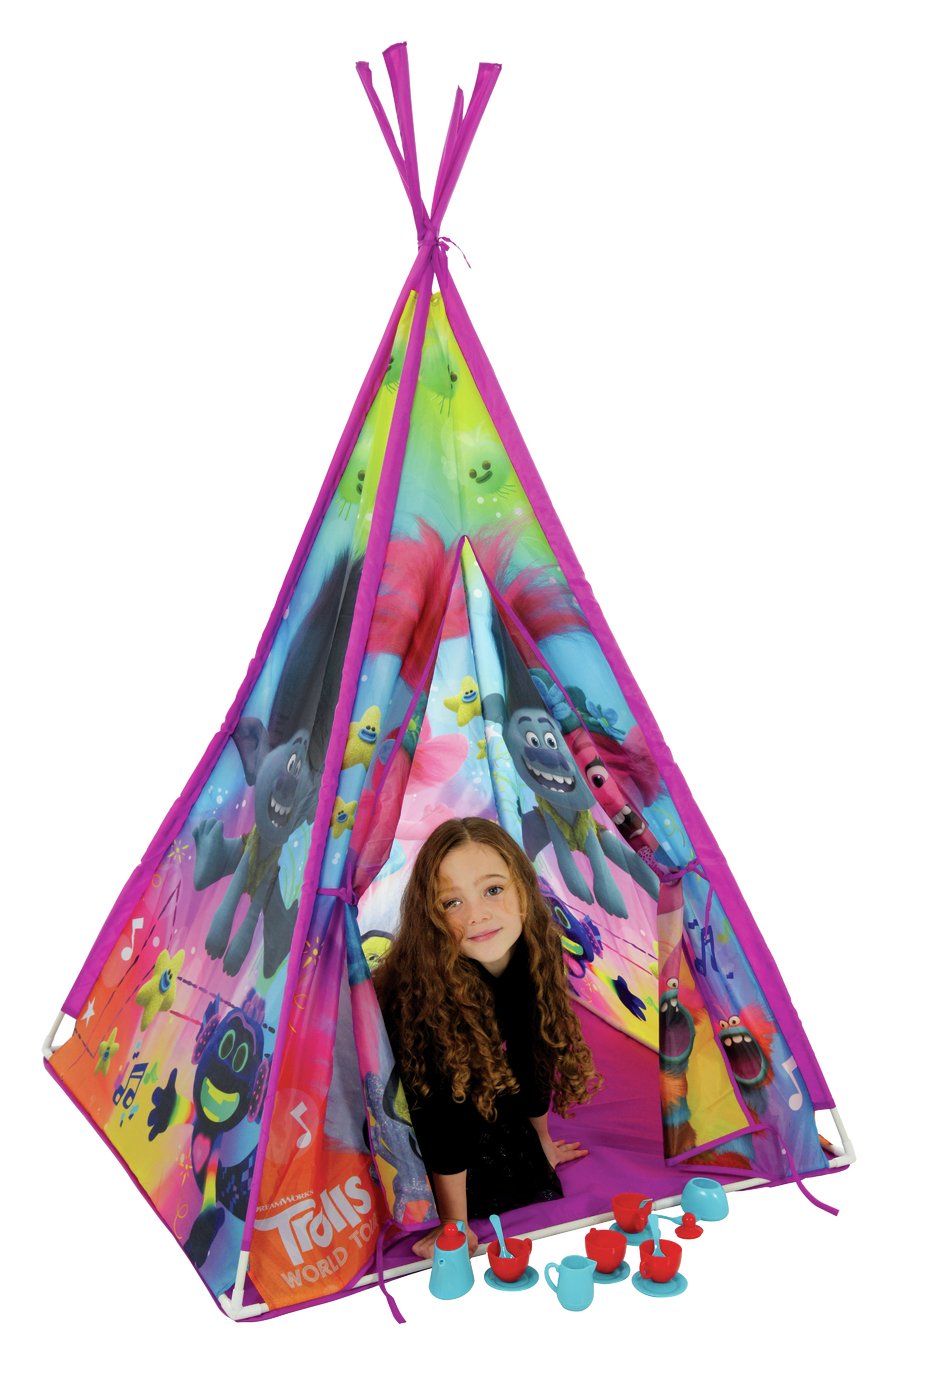 Trolls Teepee Play Tent Review